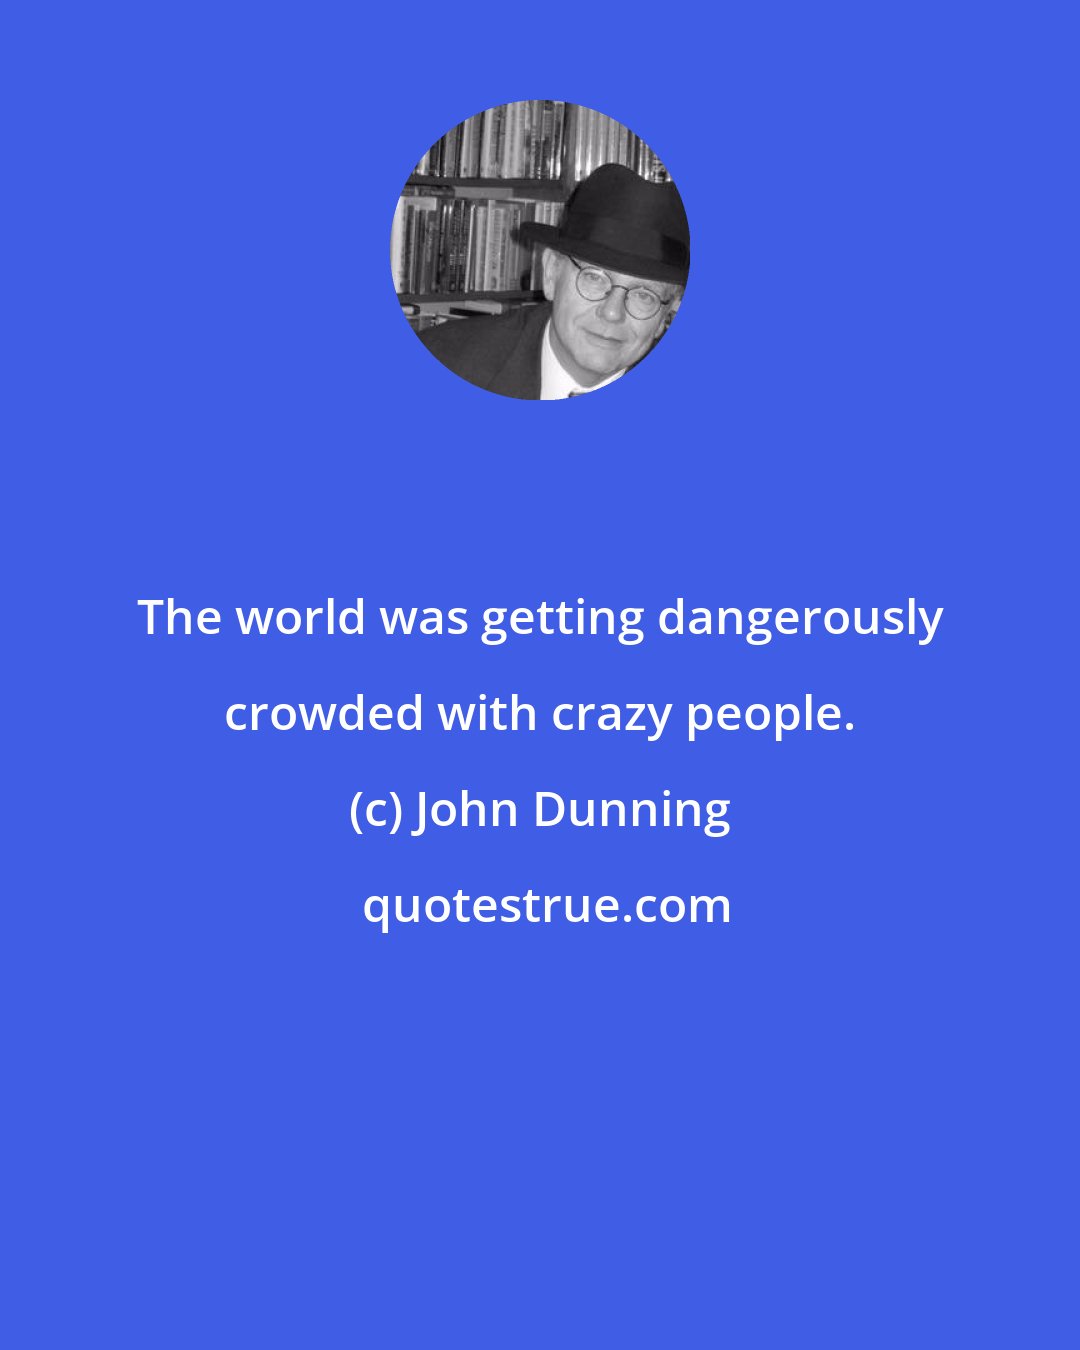 John Dunning: The world was getting dangerously crowded with crazy people.